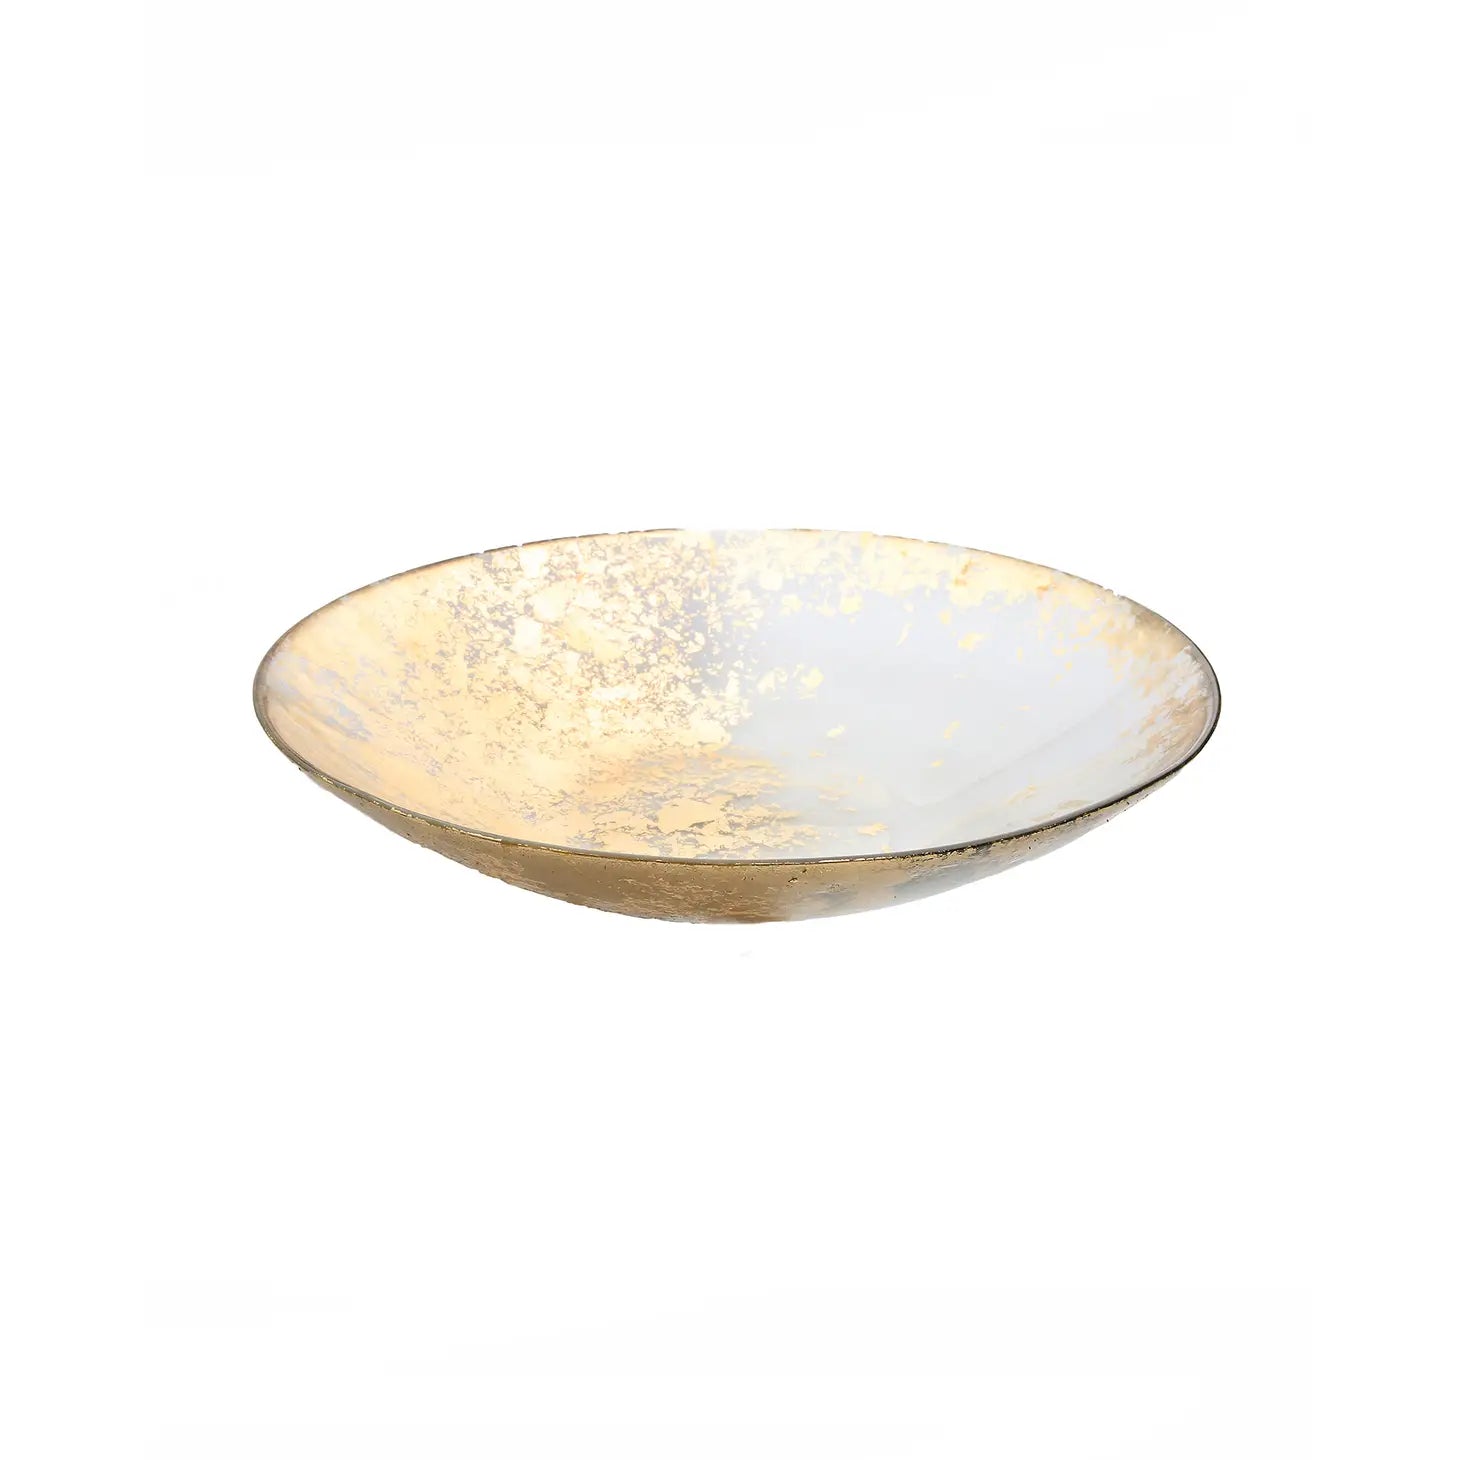 Smoked Glass Bowl with Scattered Gold Design Serving Bowls High Class Touch - Home Decor 